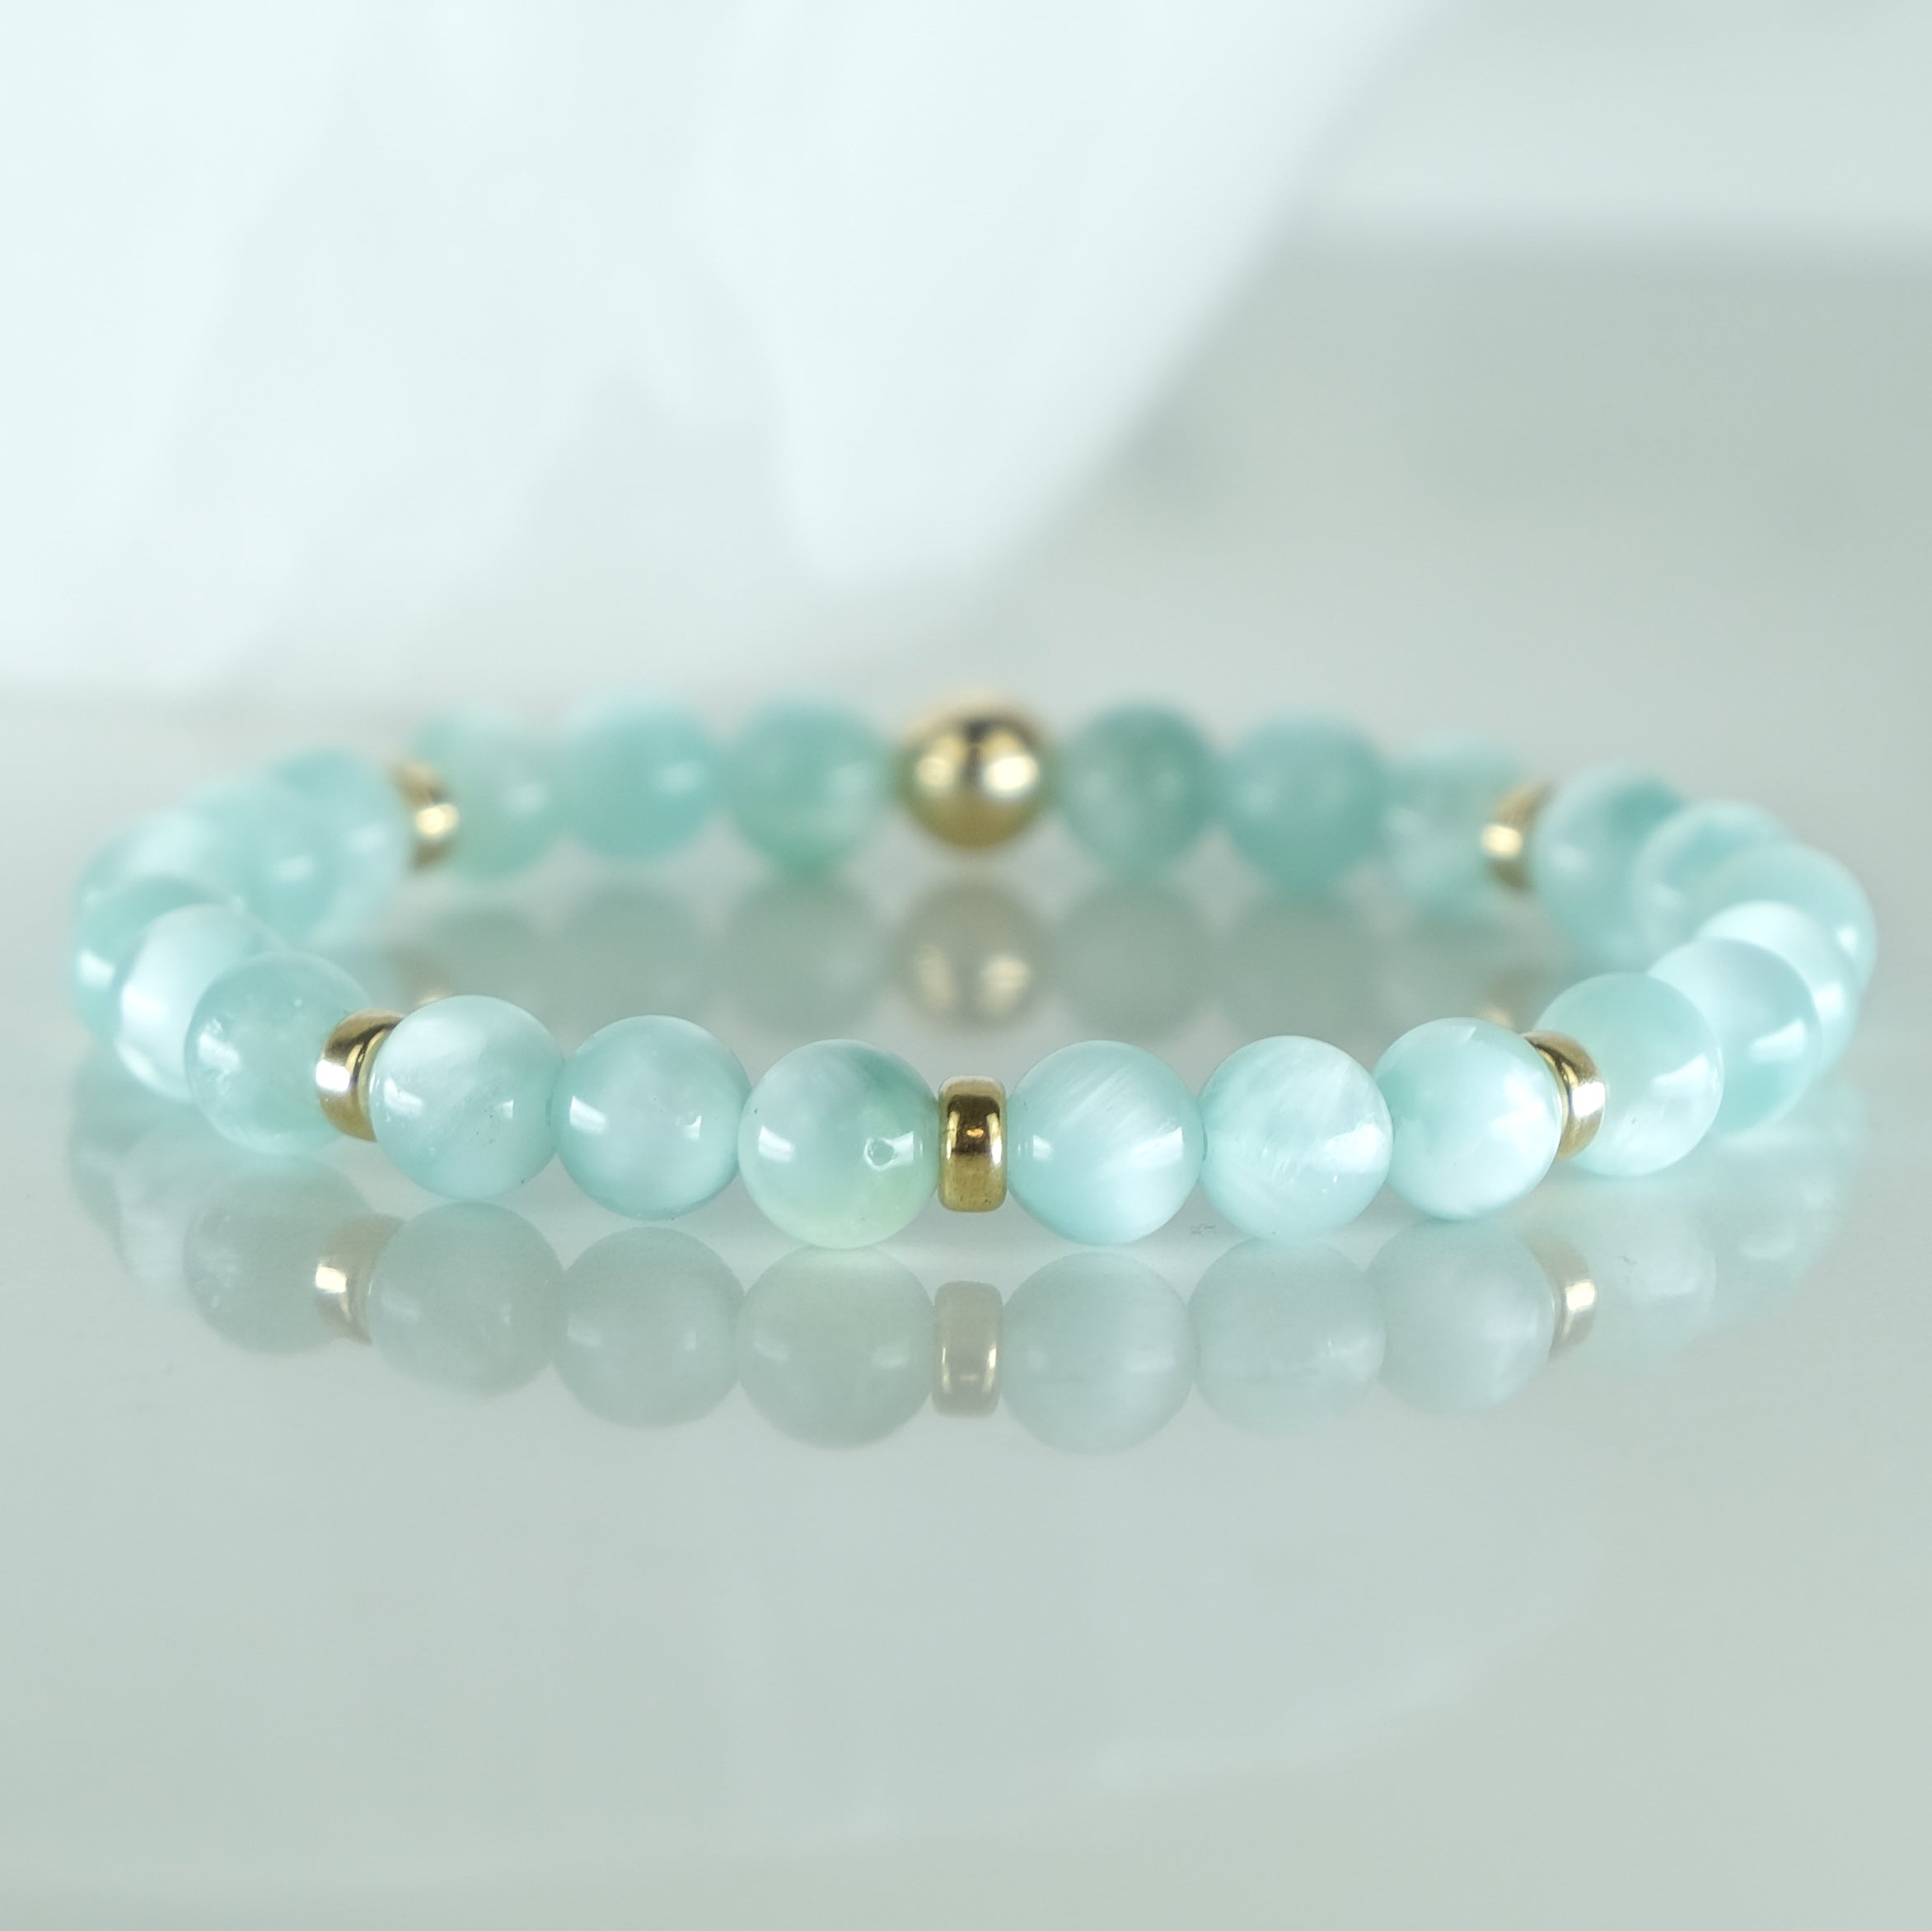 6mm green moonstone gemstone beaded bracelet with gold filled accents